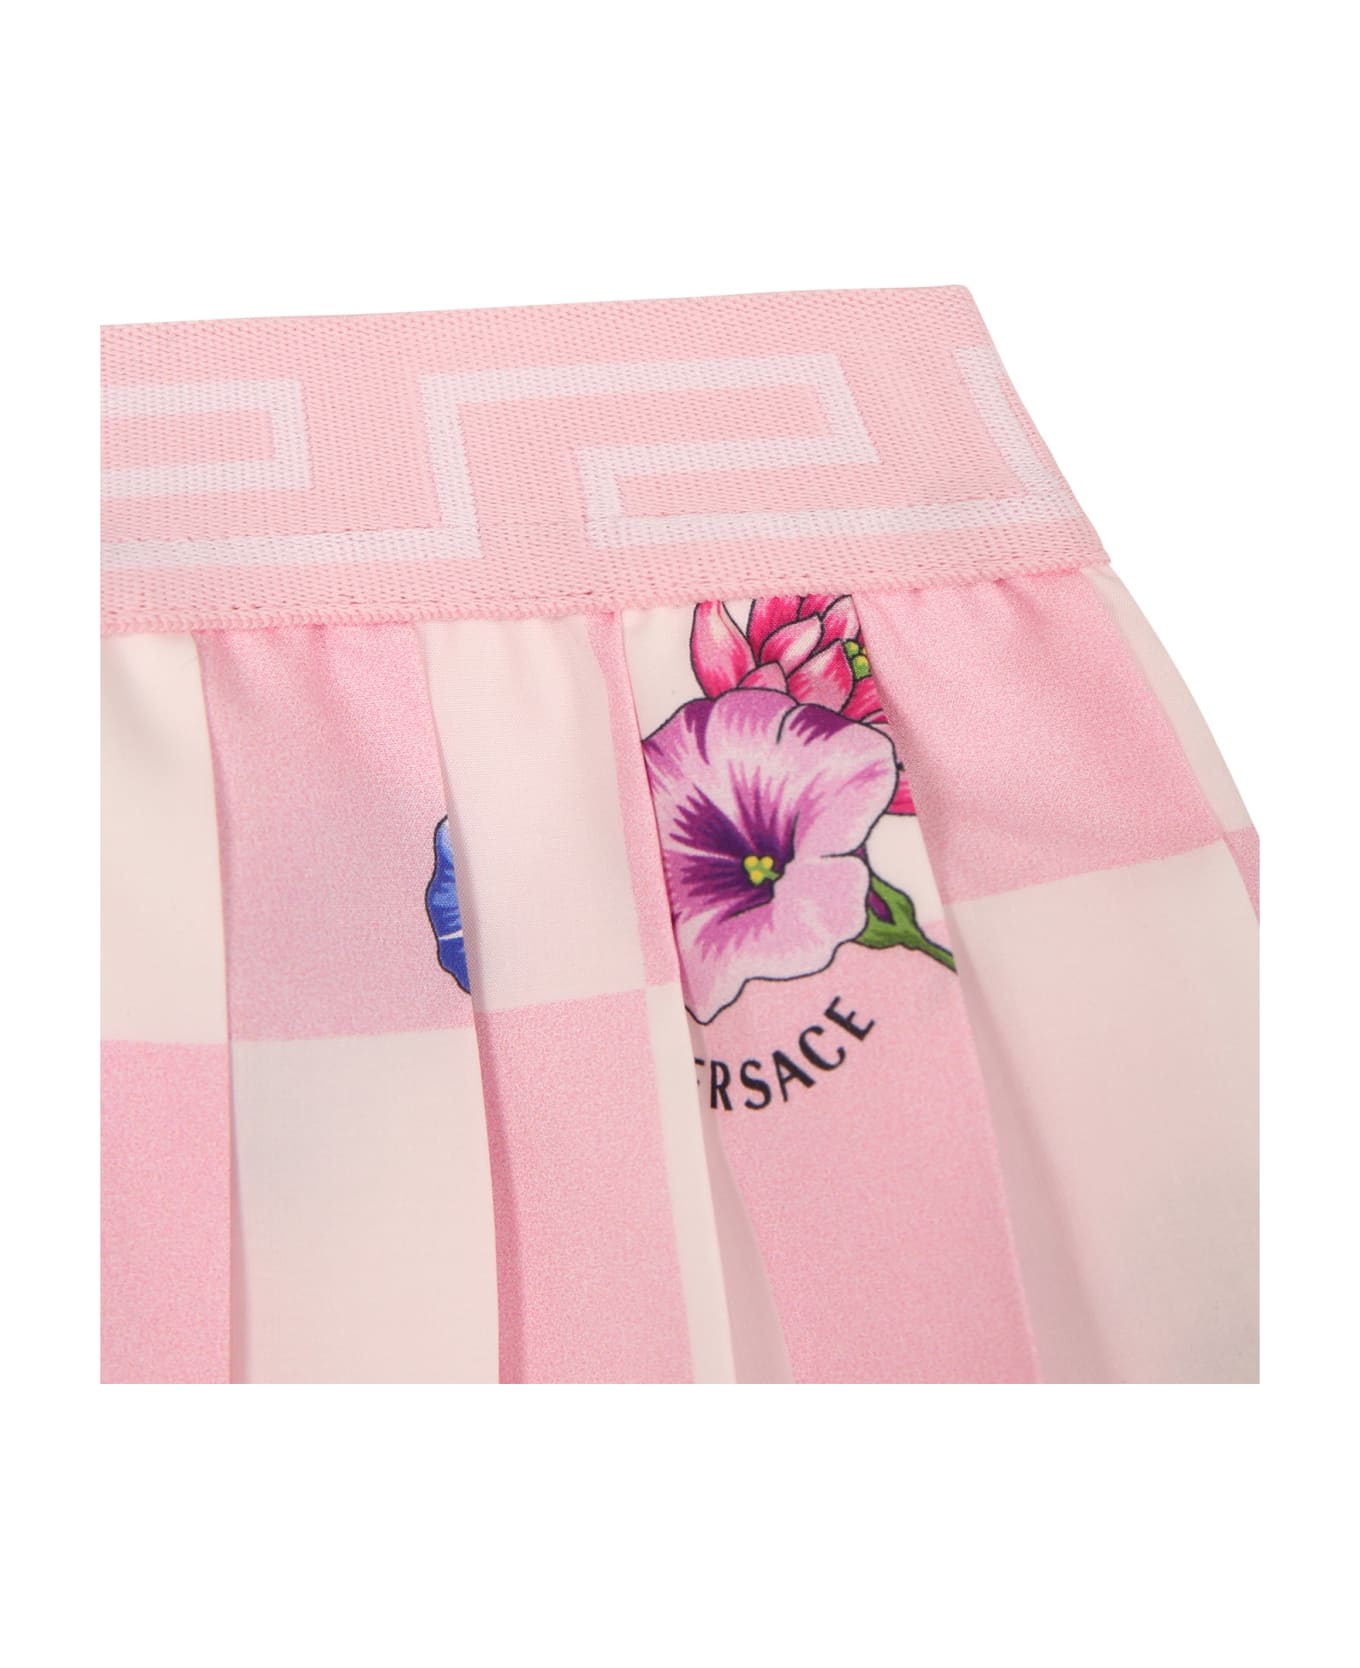 Versace Pink Skirt For Baby Girl With Flower Print - Pink ボトムス